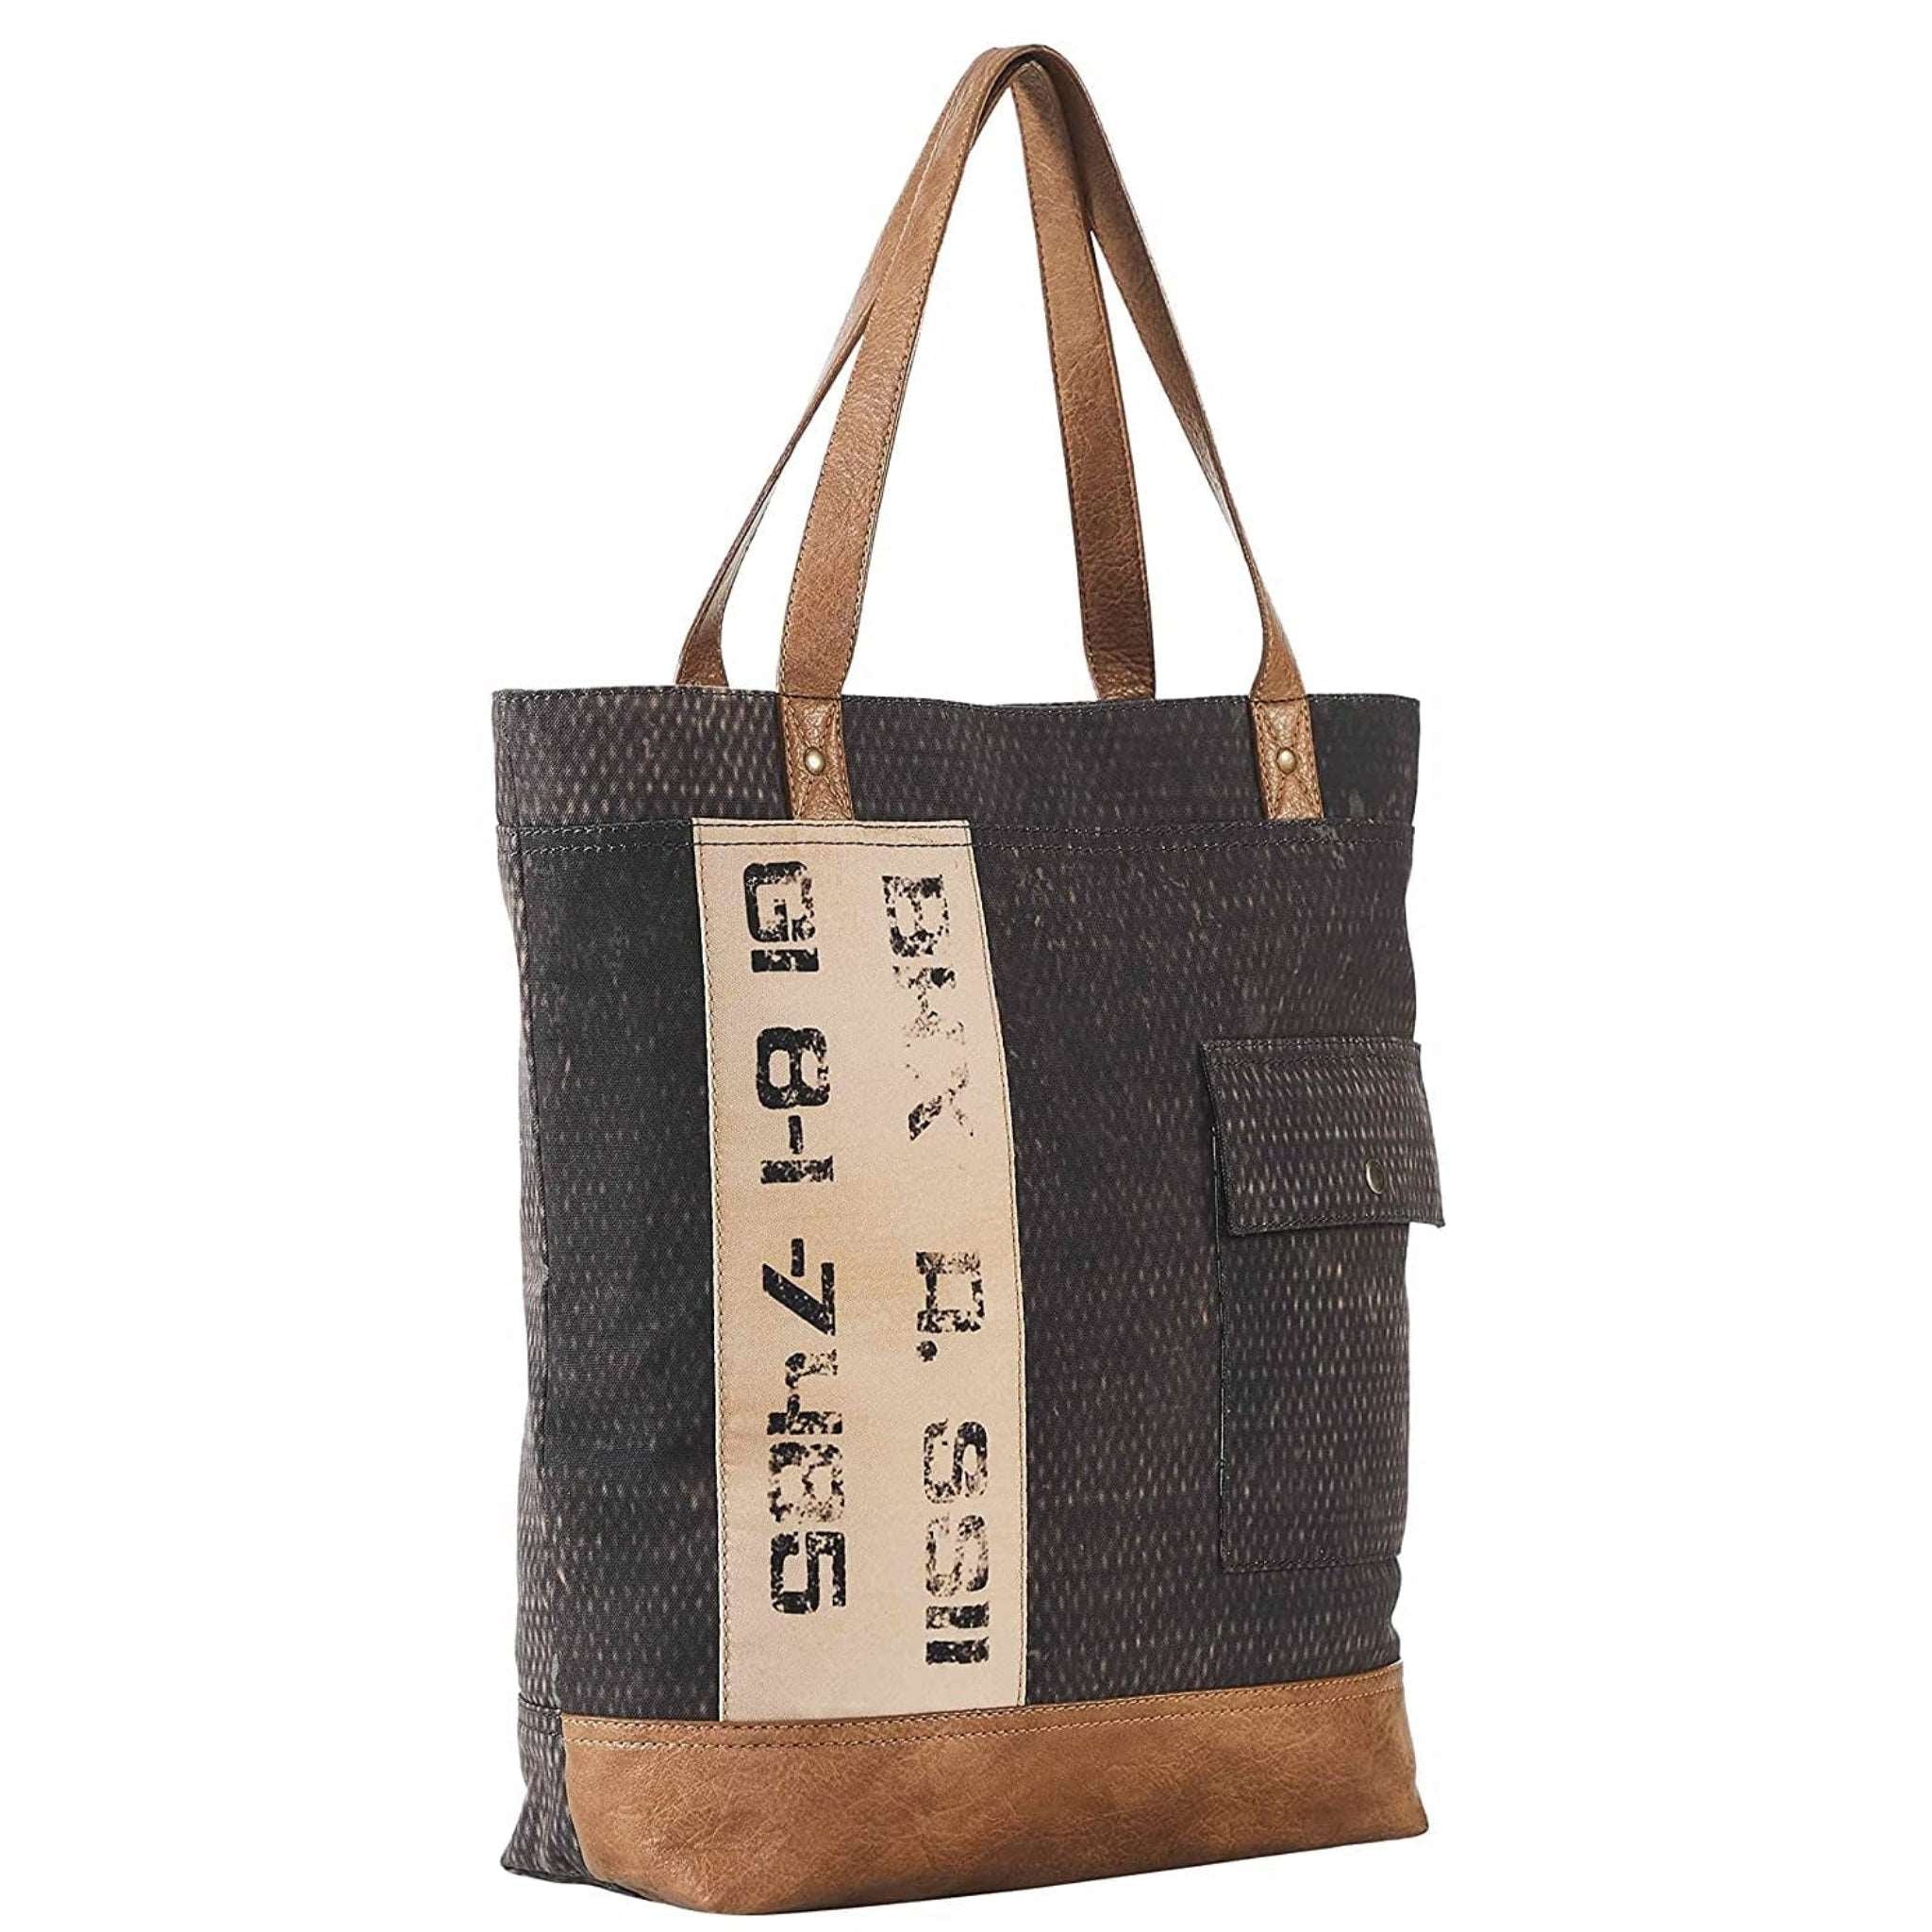 Mona B Brown Large Canvas Handbag for Women | Tote Bag for Grocery, Shopping, Travel | Stylish Vintage Shoulder Bags for Women - Handbag by Mona-B - Backpack, EOSS, Sale, Shop1999, Shop2999, Shop3999